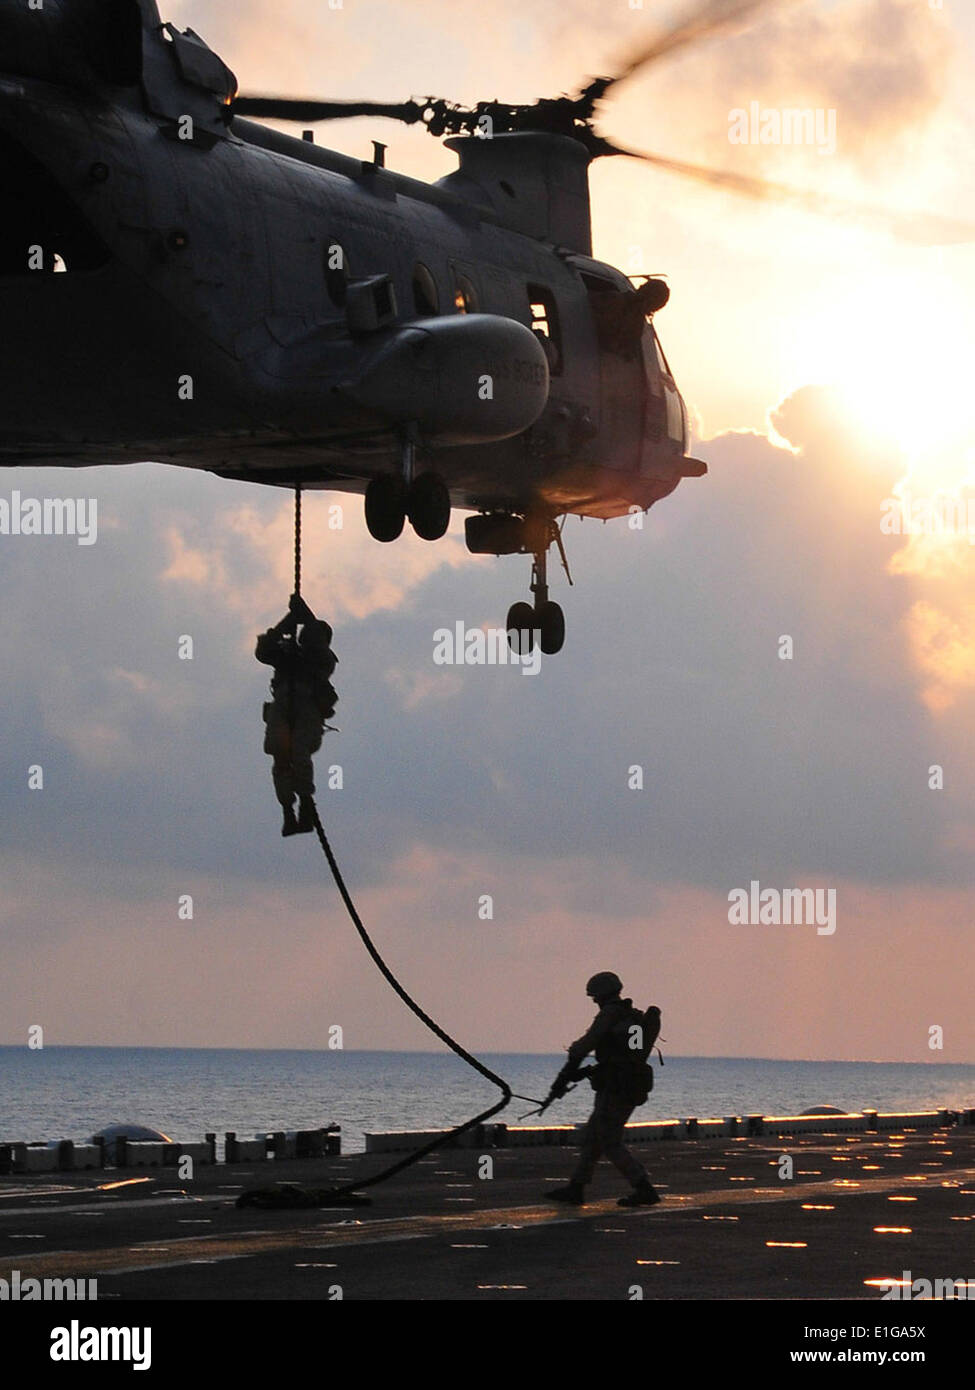 U.S. Marines assigned to the 13th Marine Expeditionary Unit (MEU) drop from a CH-46 Sea Knight helicopter assigned to Marine Me Stock Photo